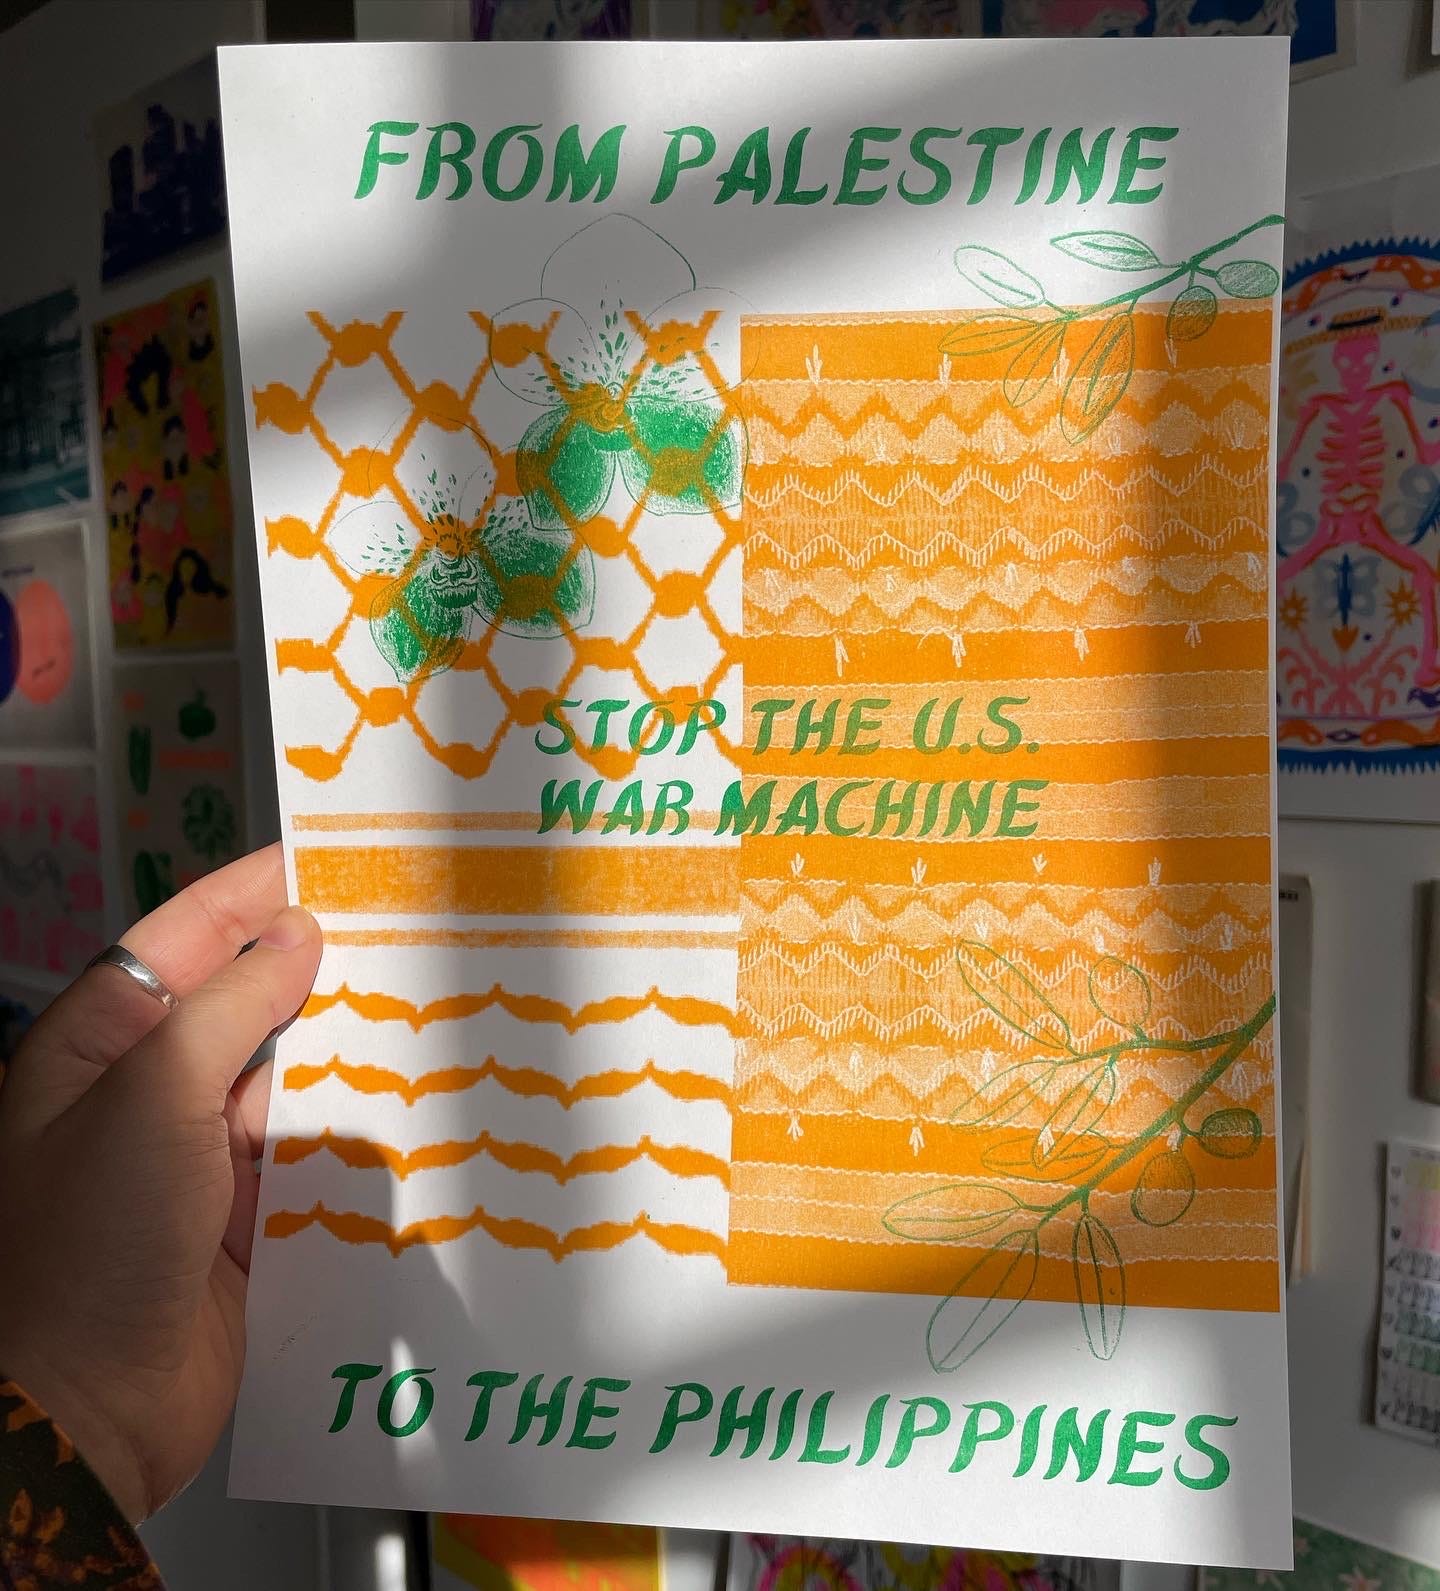 photo of me holding a green and orange poster that reads "FROM PALESTINE TO THE PHILIPPINES, STOP THE US WAR MACHINE" in green Filipino style calligraphy. There is a keffiyeh and Filipino indigenous fabric print side by side in orange. Drawings of two orchids and two olive branches are overlayed in green.